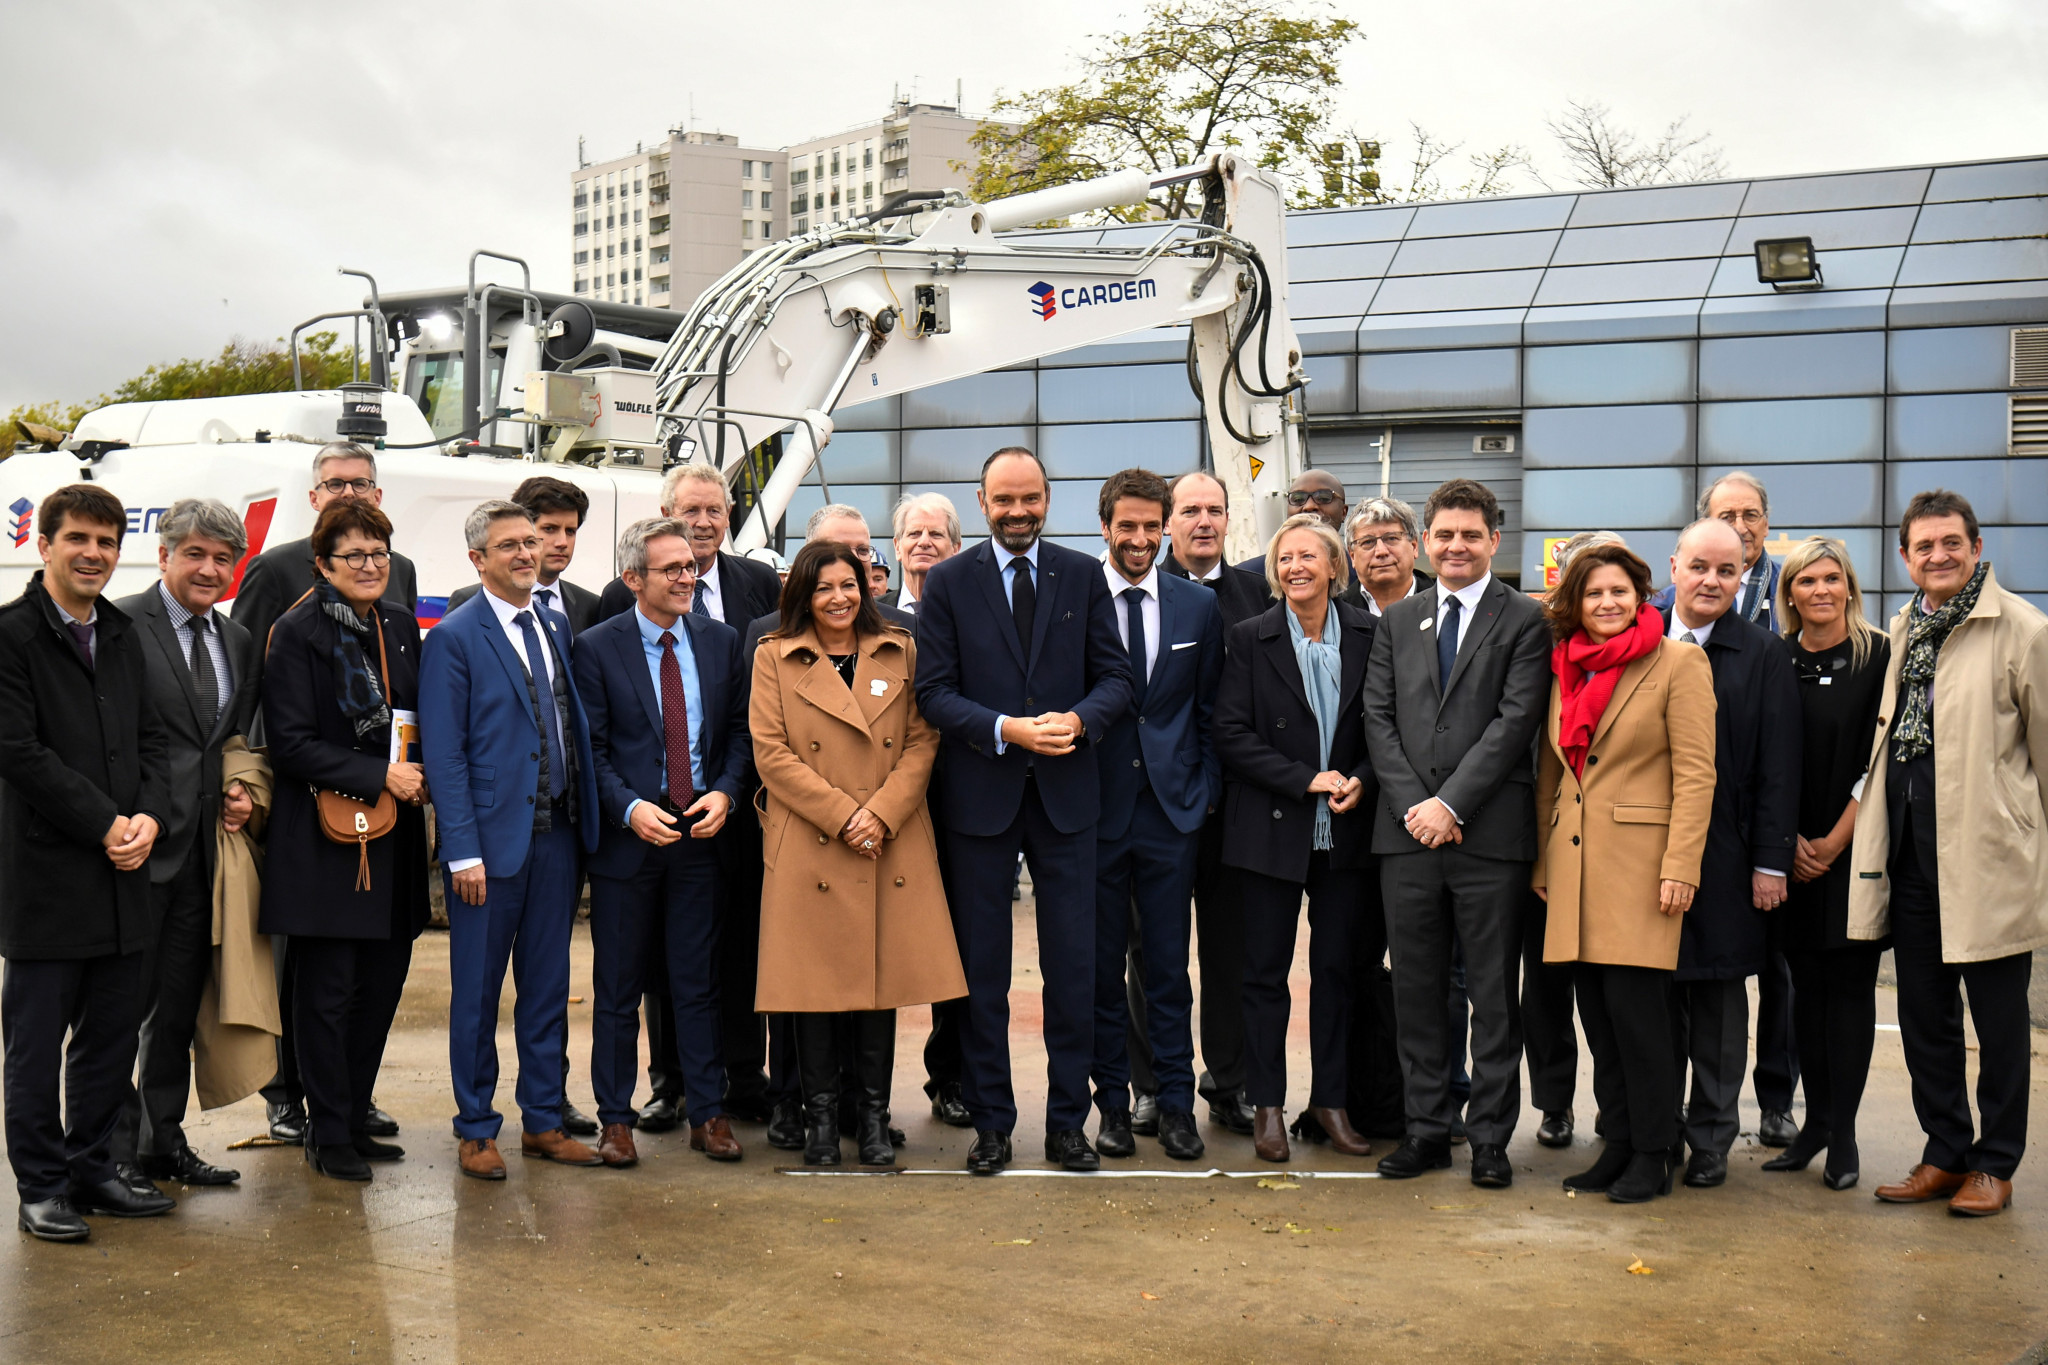 Construction work launched at site of Paris 2024 Athletes' Village